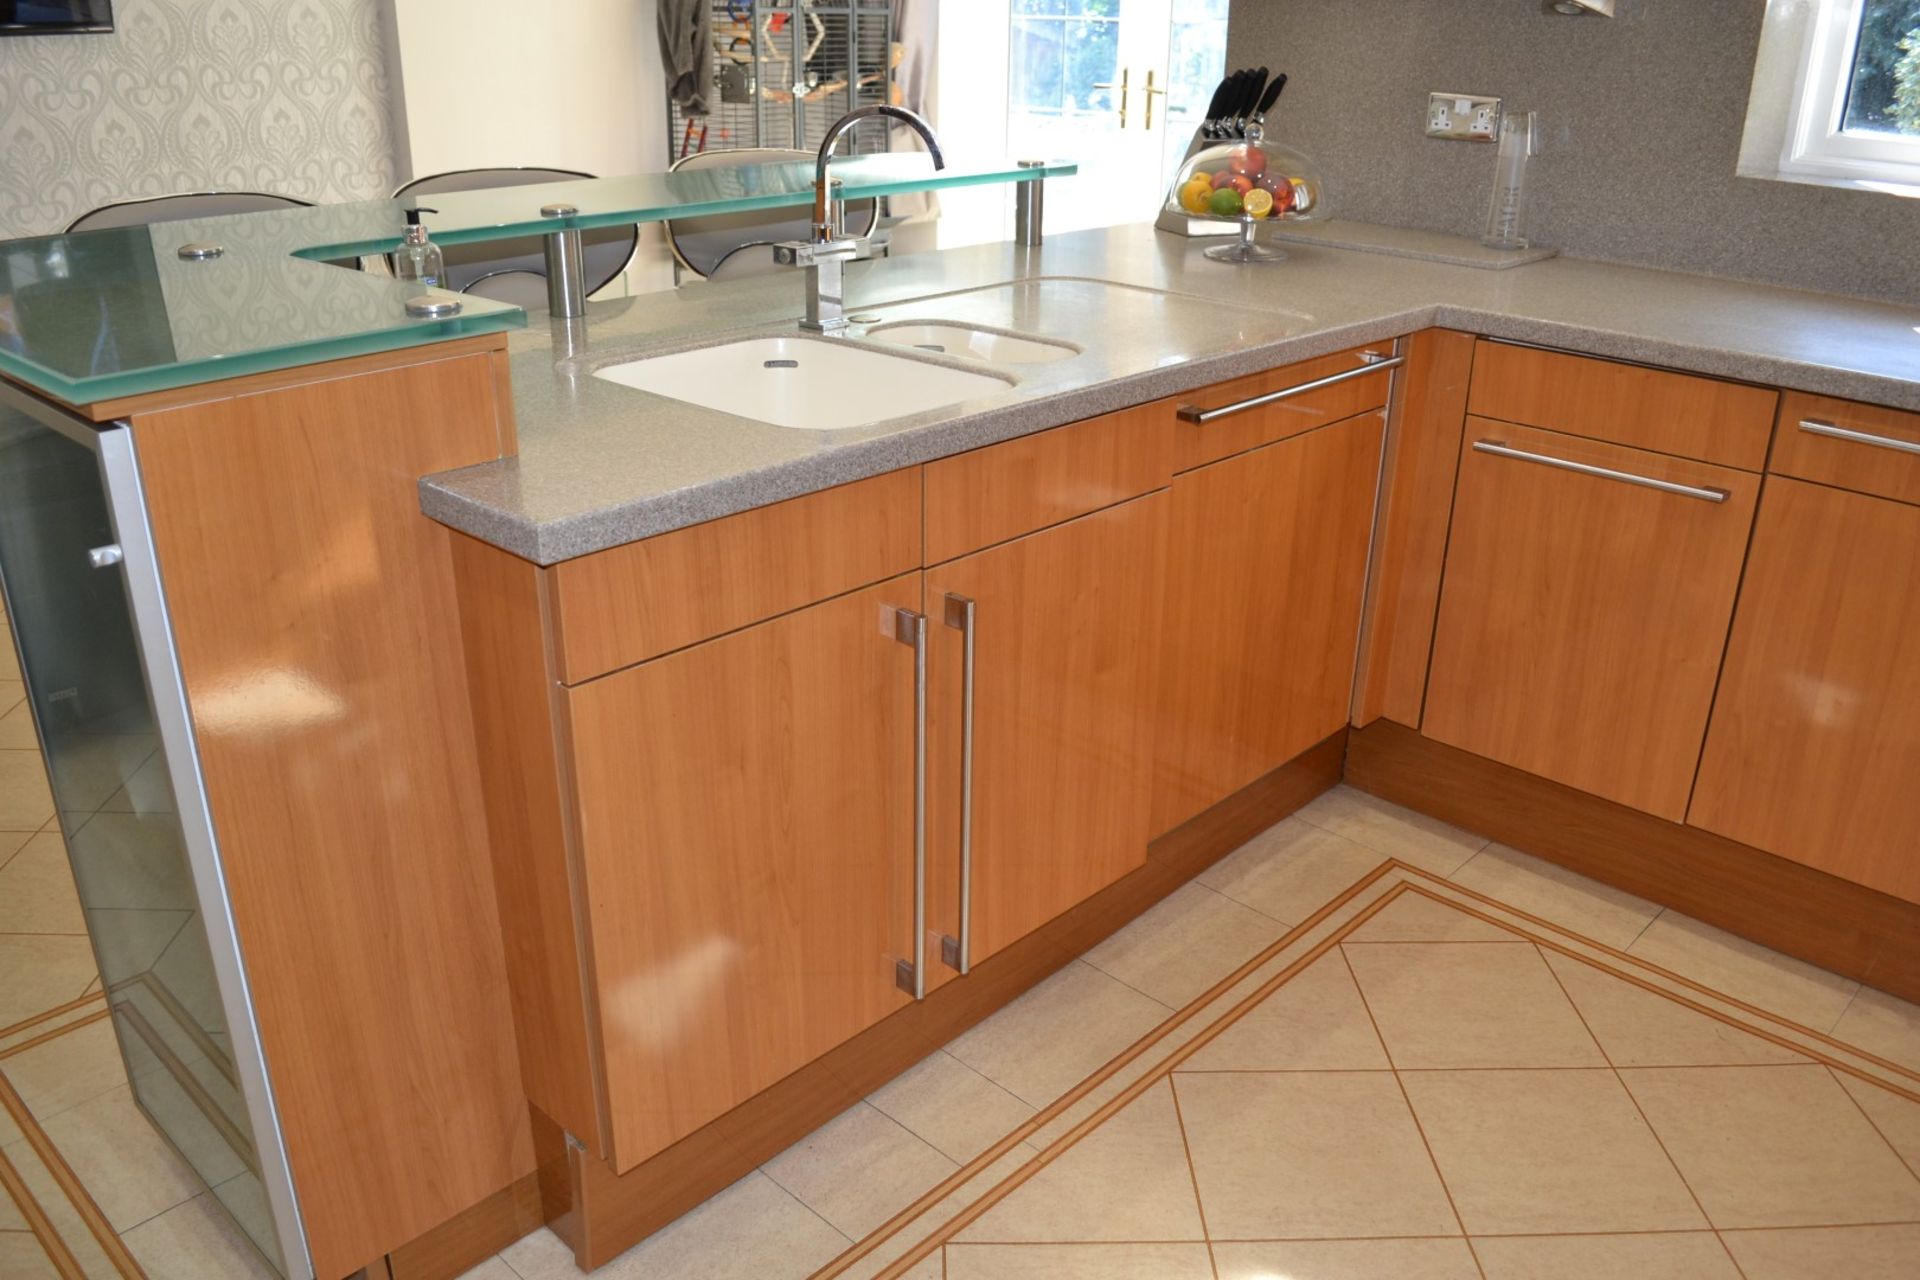 1 x Bespoke Siematic Gloss Fitted Kitchen With Corian Worktops and Frosted Glass Breakfast Bar - - Image 15 of 75